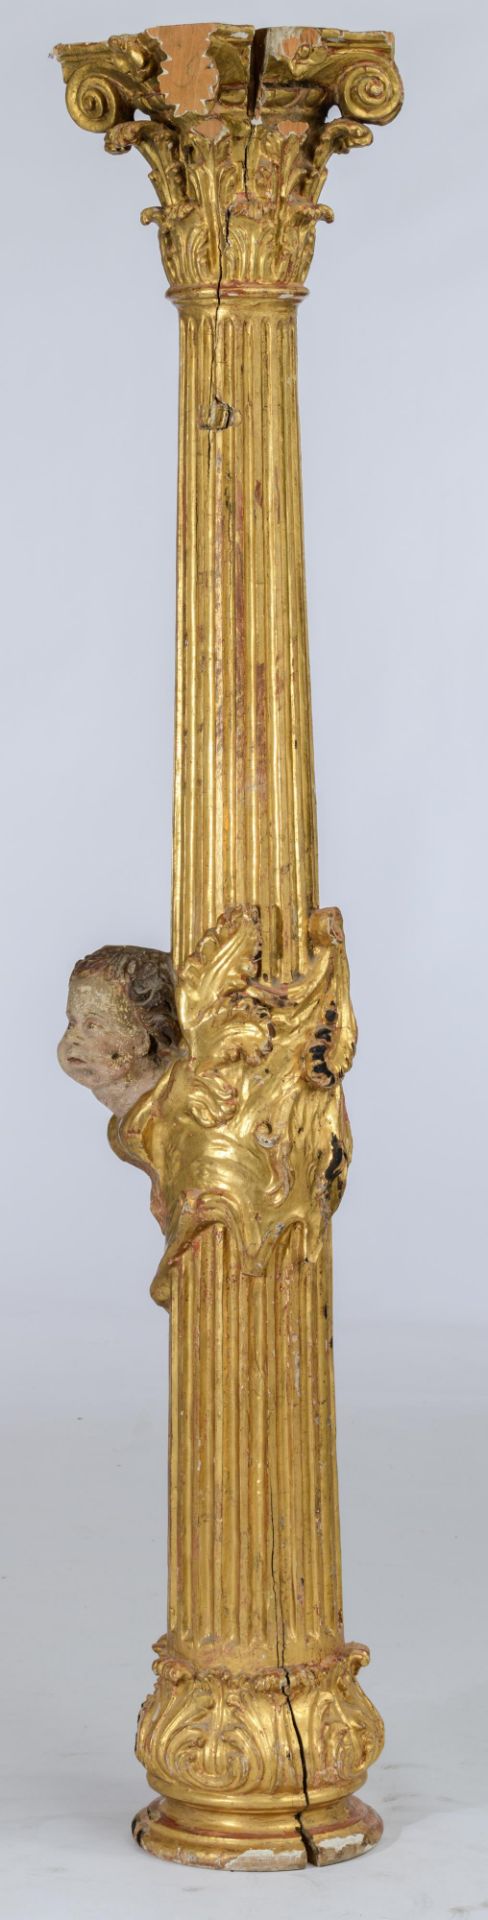 An imposing and finely carved gilt and polychrome painted Neoclassical column with a Corinthian capi - Bild 3 aus 13